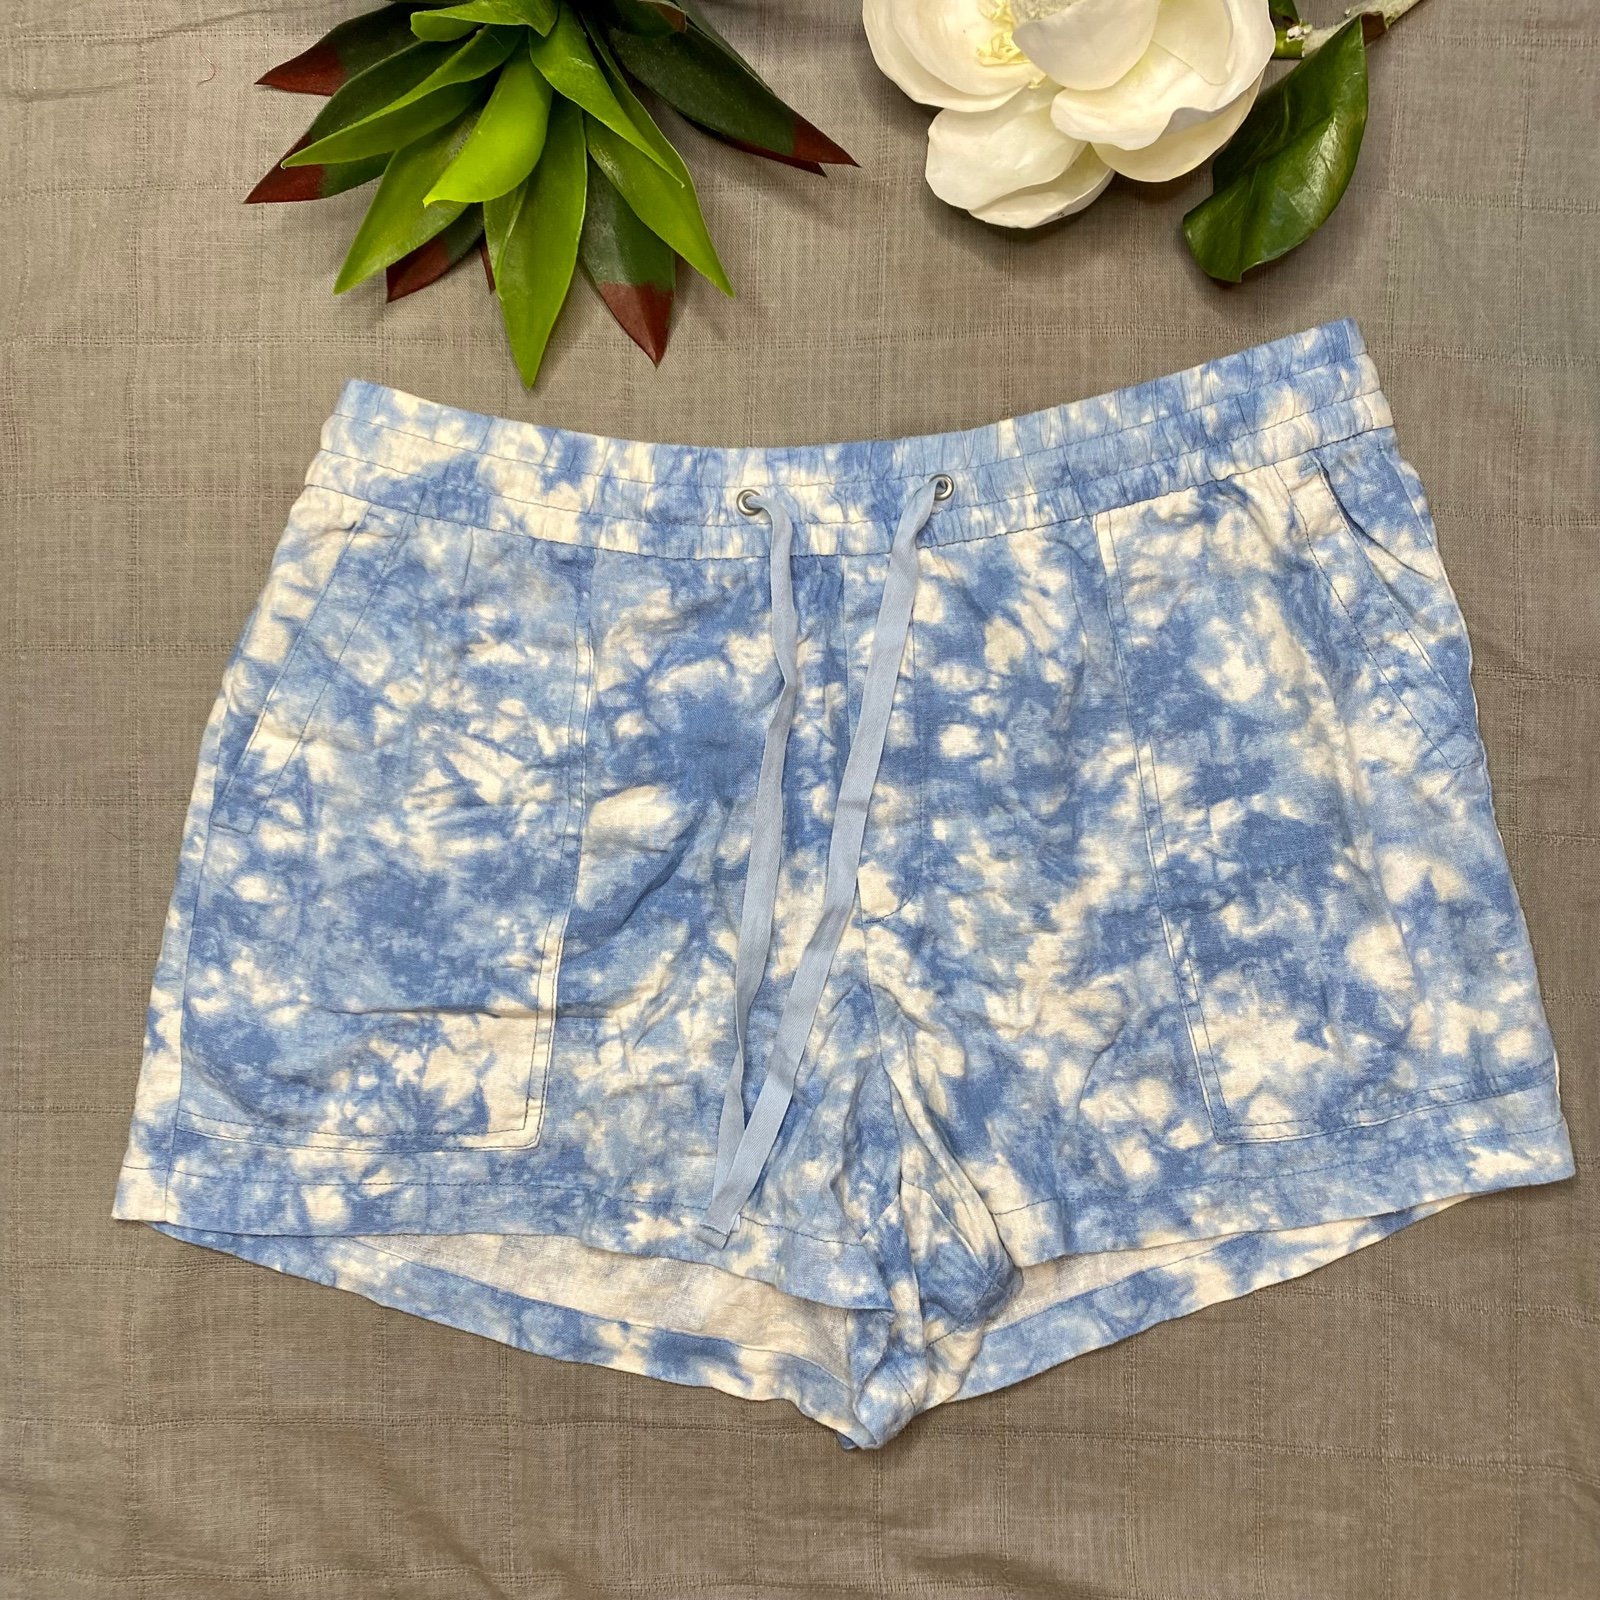 The Best Seller Tie dye blue and white pull on shorts p